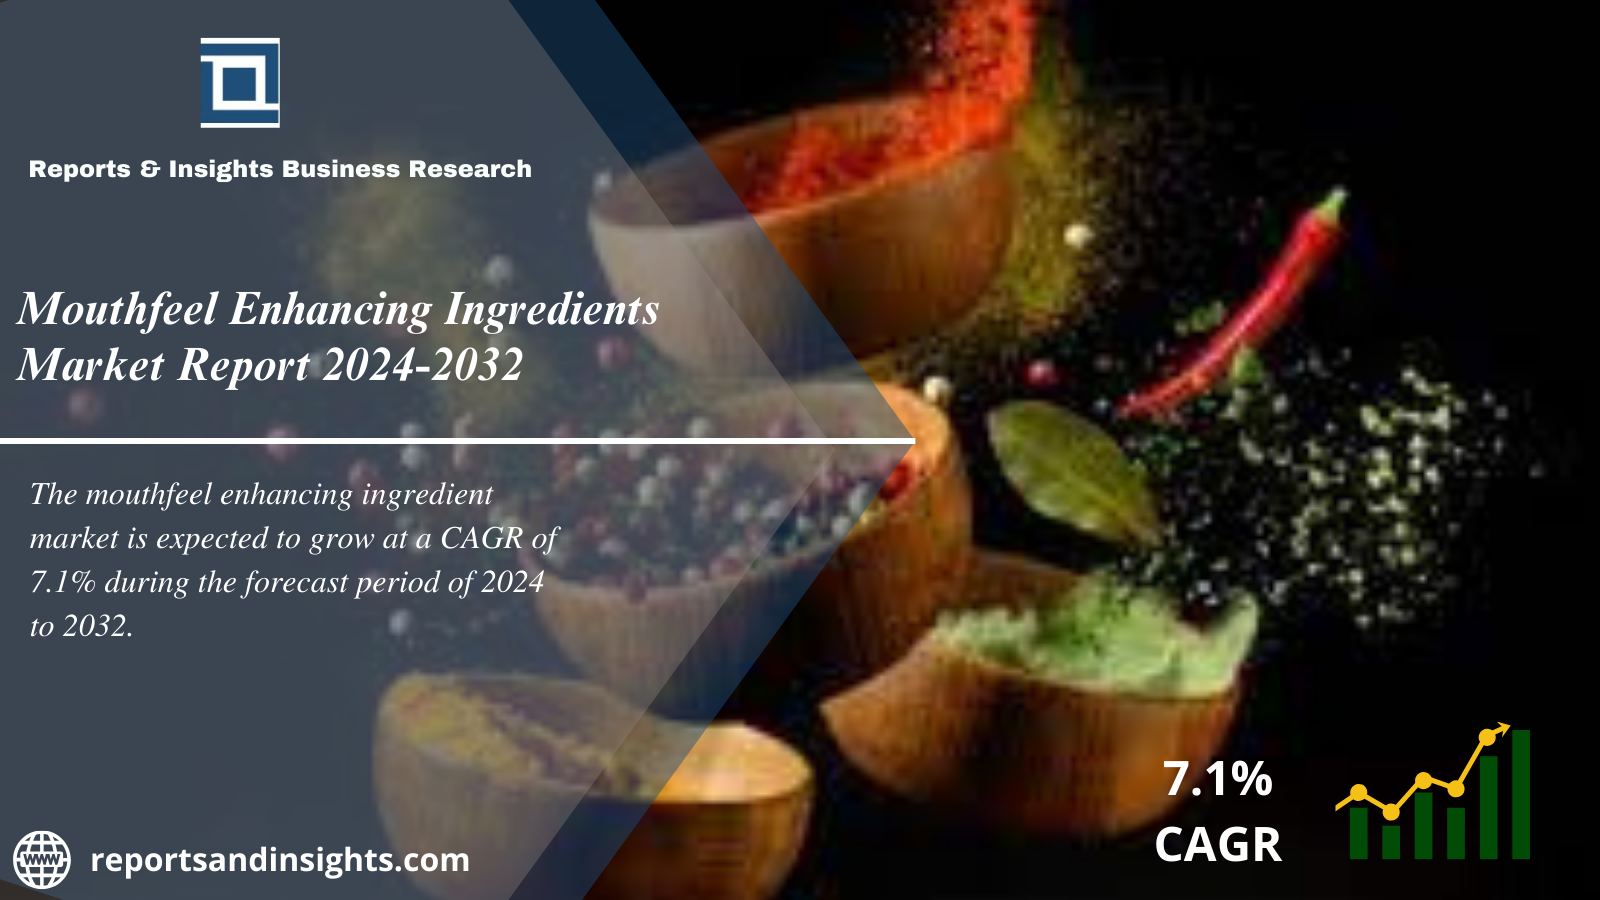 Mouthfeel Enhancing Ingredients Market Research Report (2024 to 2032) Size, Share, Growth, Trends and Forecast